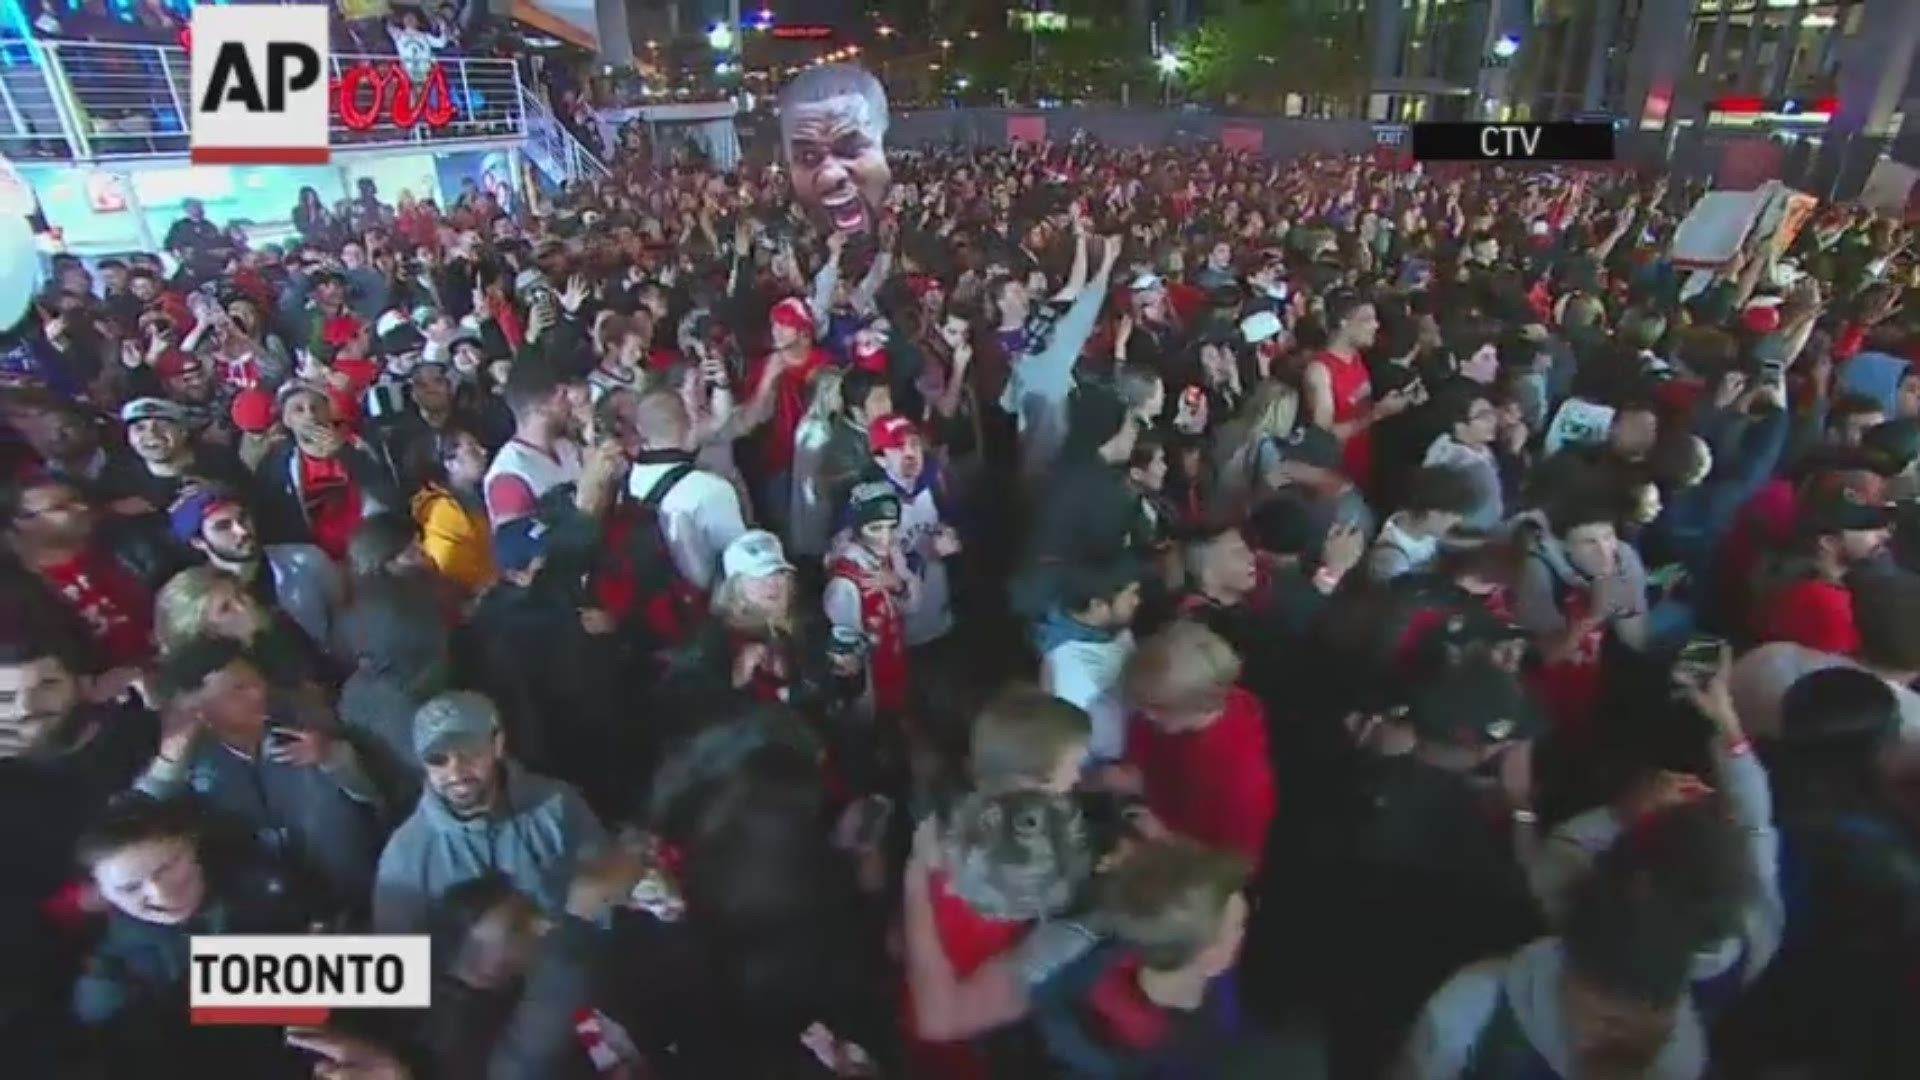 Thousands in Toronto cheered on the Raptors, who won their first NBA championship on Thursday night. (AP)